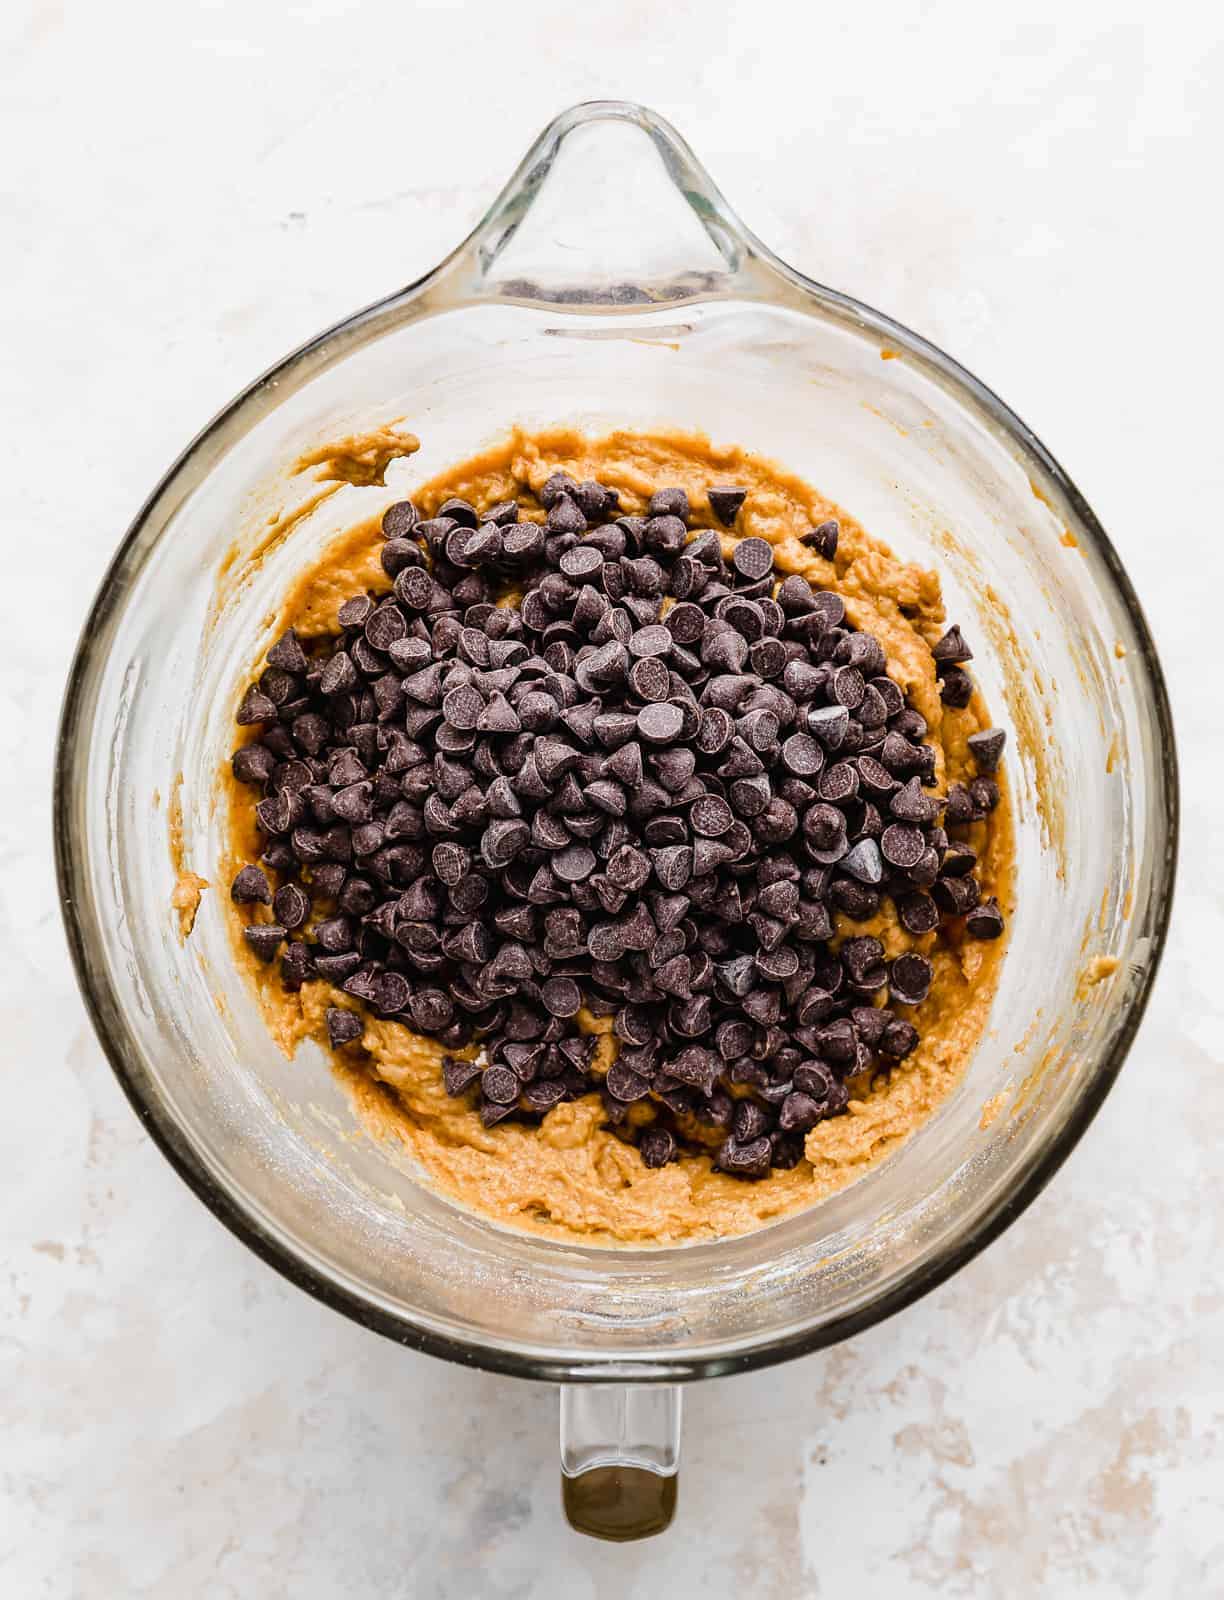 Chocolate chips in a glass bowl atop an orange cake batter mixture.